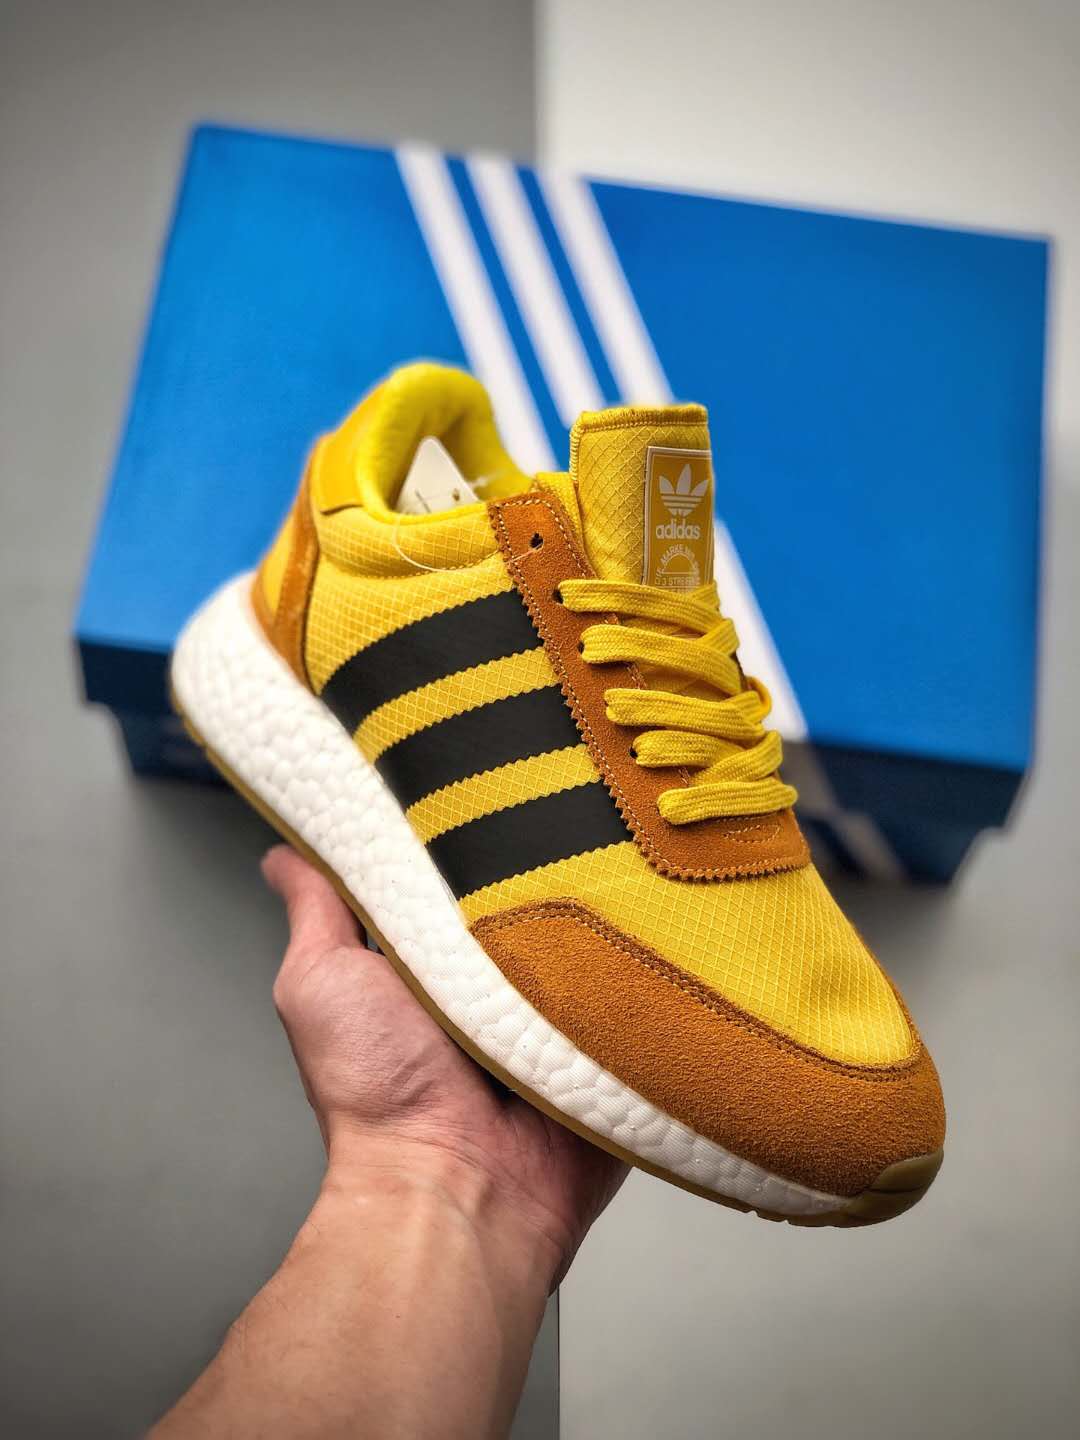 Adidas I-5923 'Yellow Gum' BD7612 - Stylish Sneakers with Vibrant Appeal